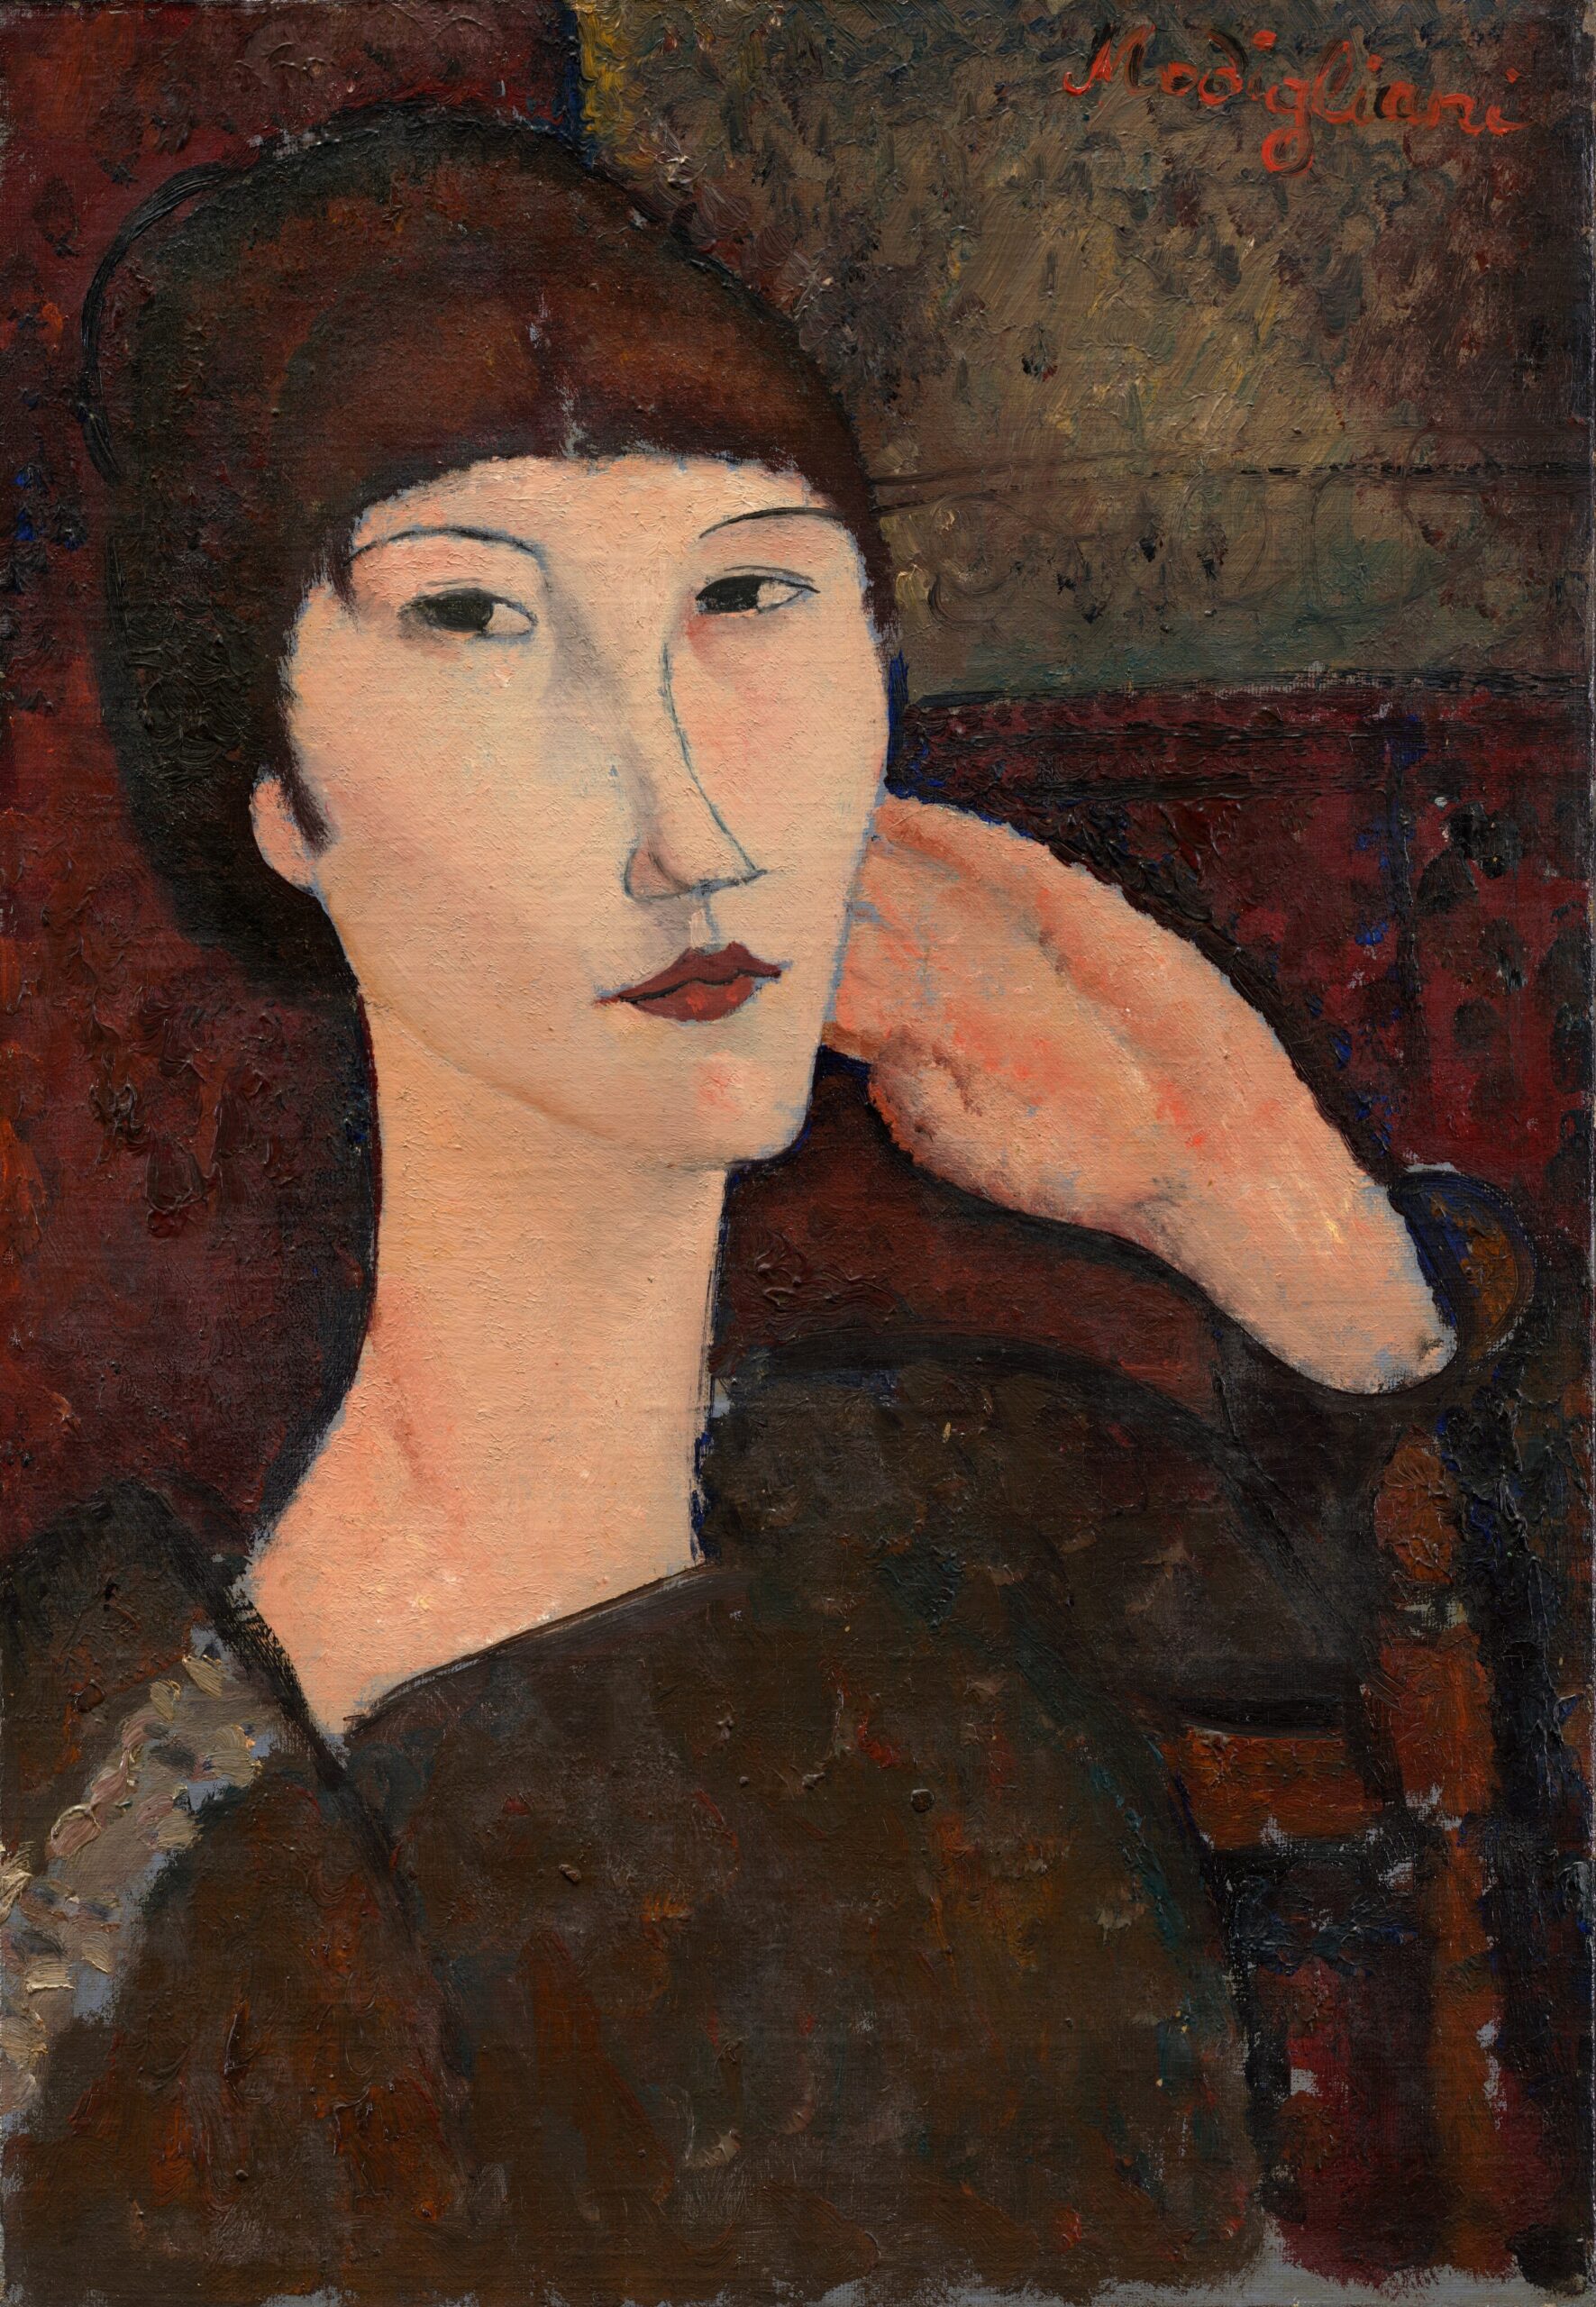 A woman with exaggerated stylized features is shown with her hand behind her head.